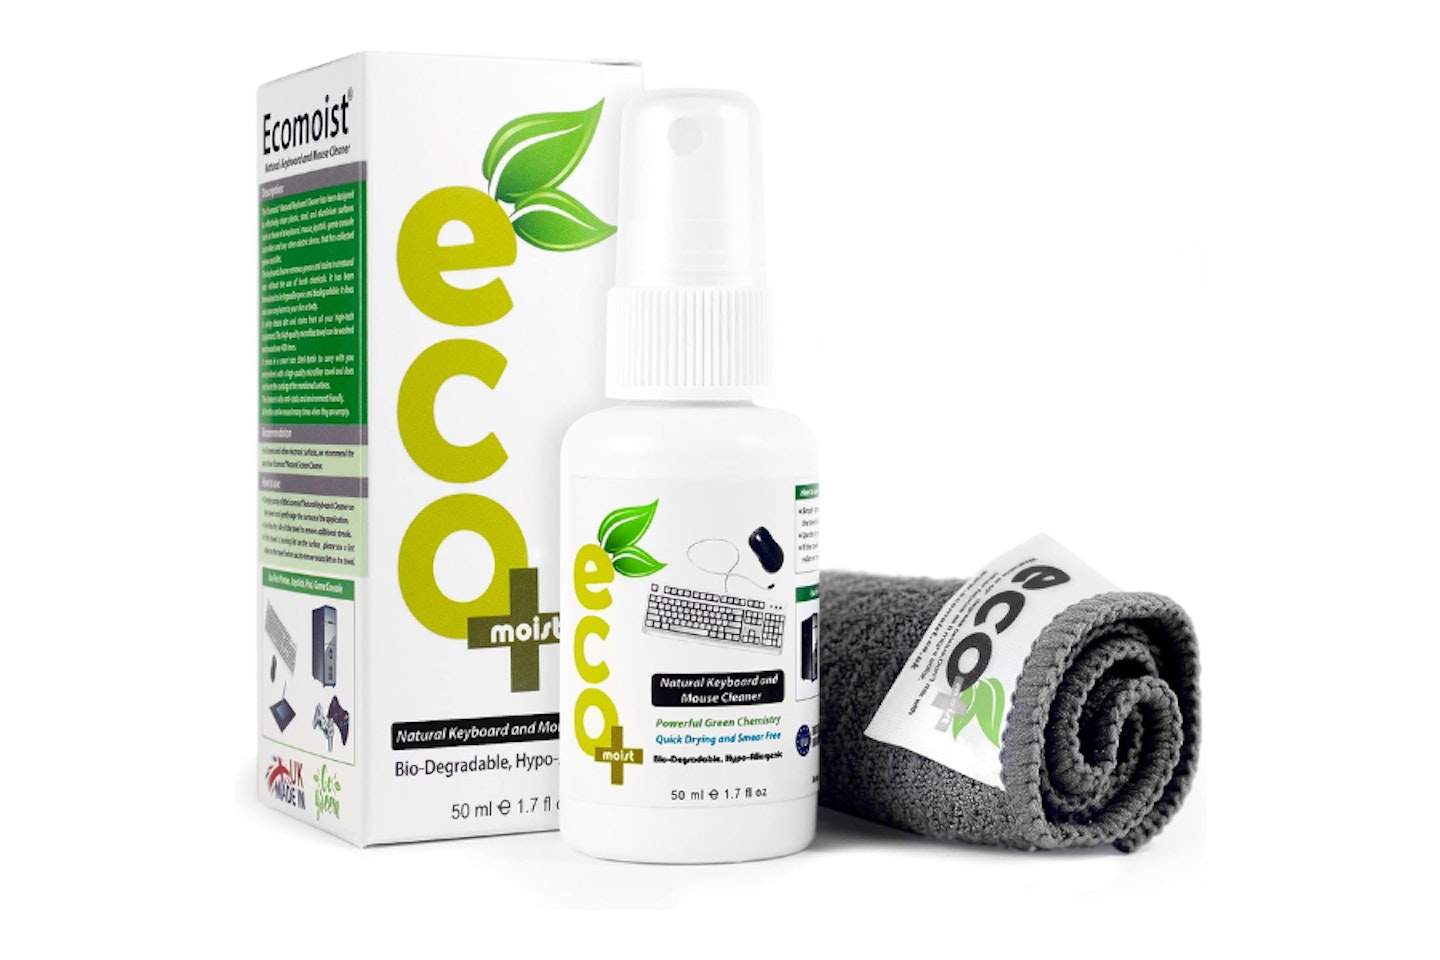 Ecomoist Natural Keyboard and Mouse Cleaner. - one of the best keyboard cleaner products